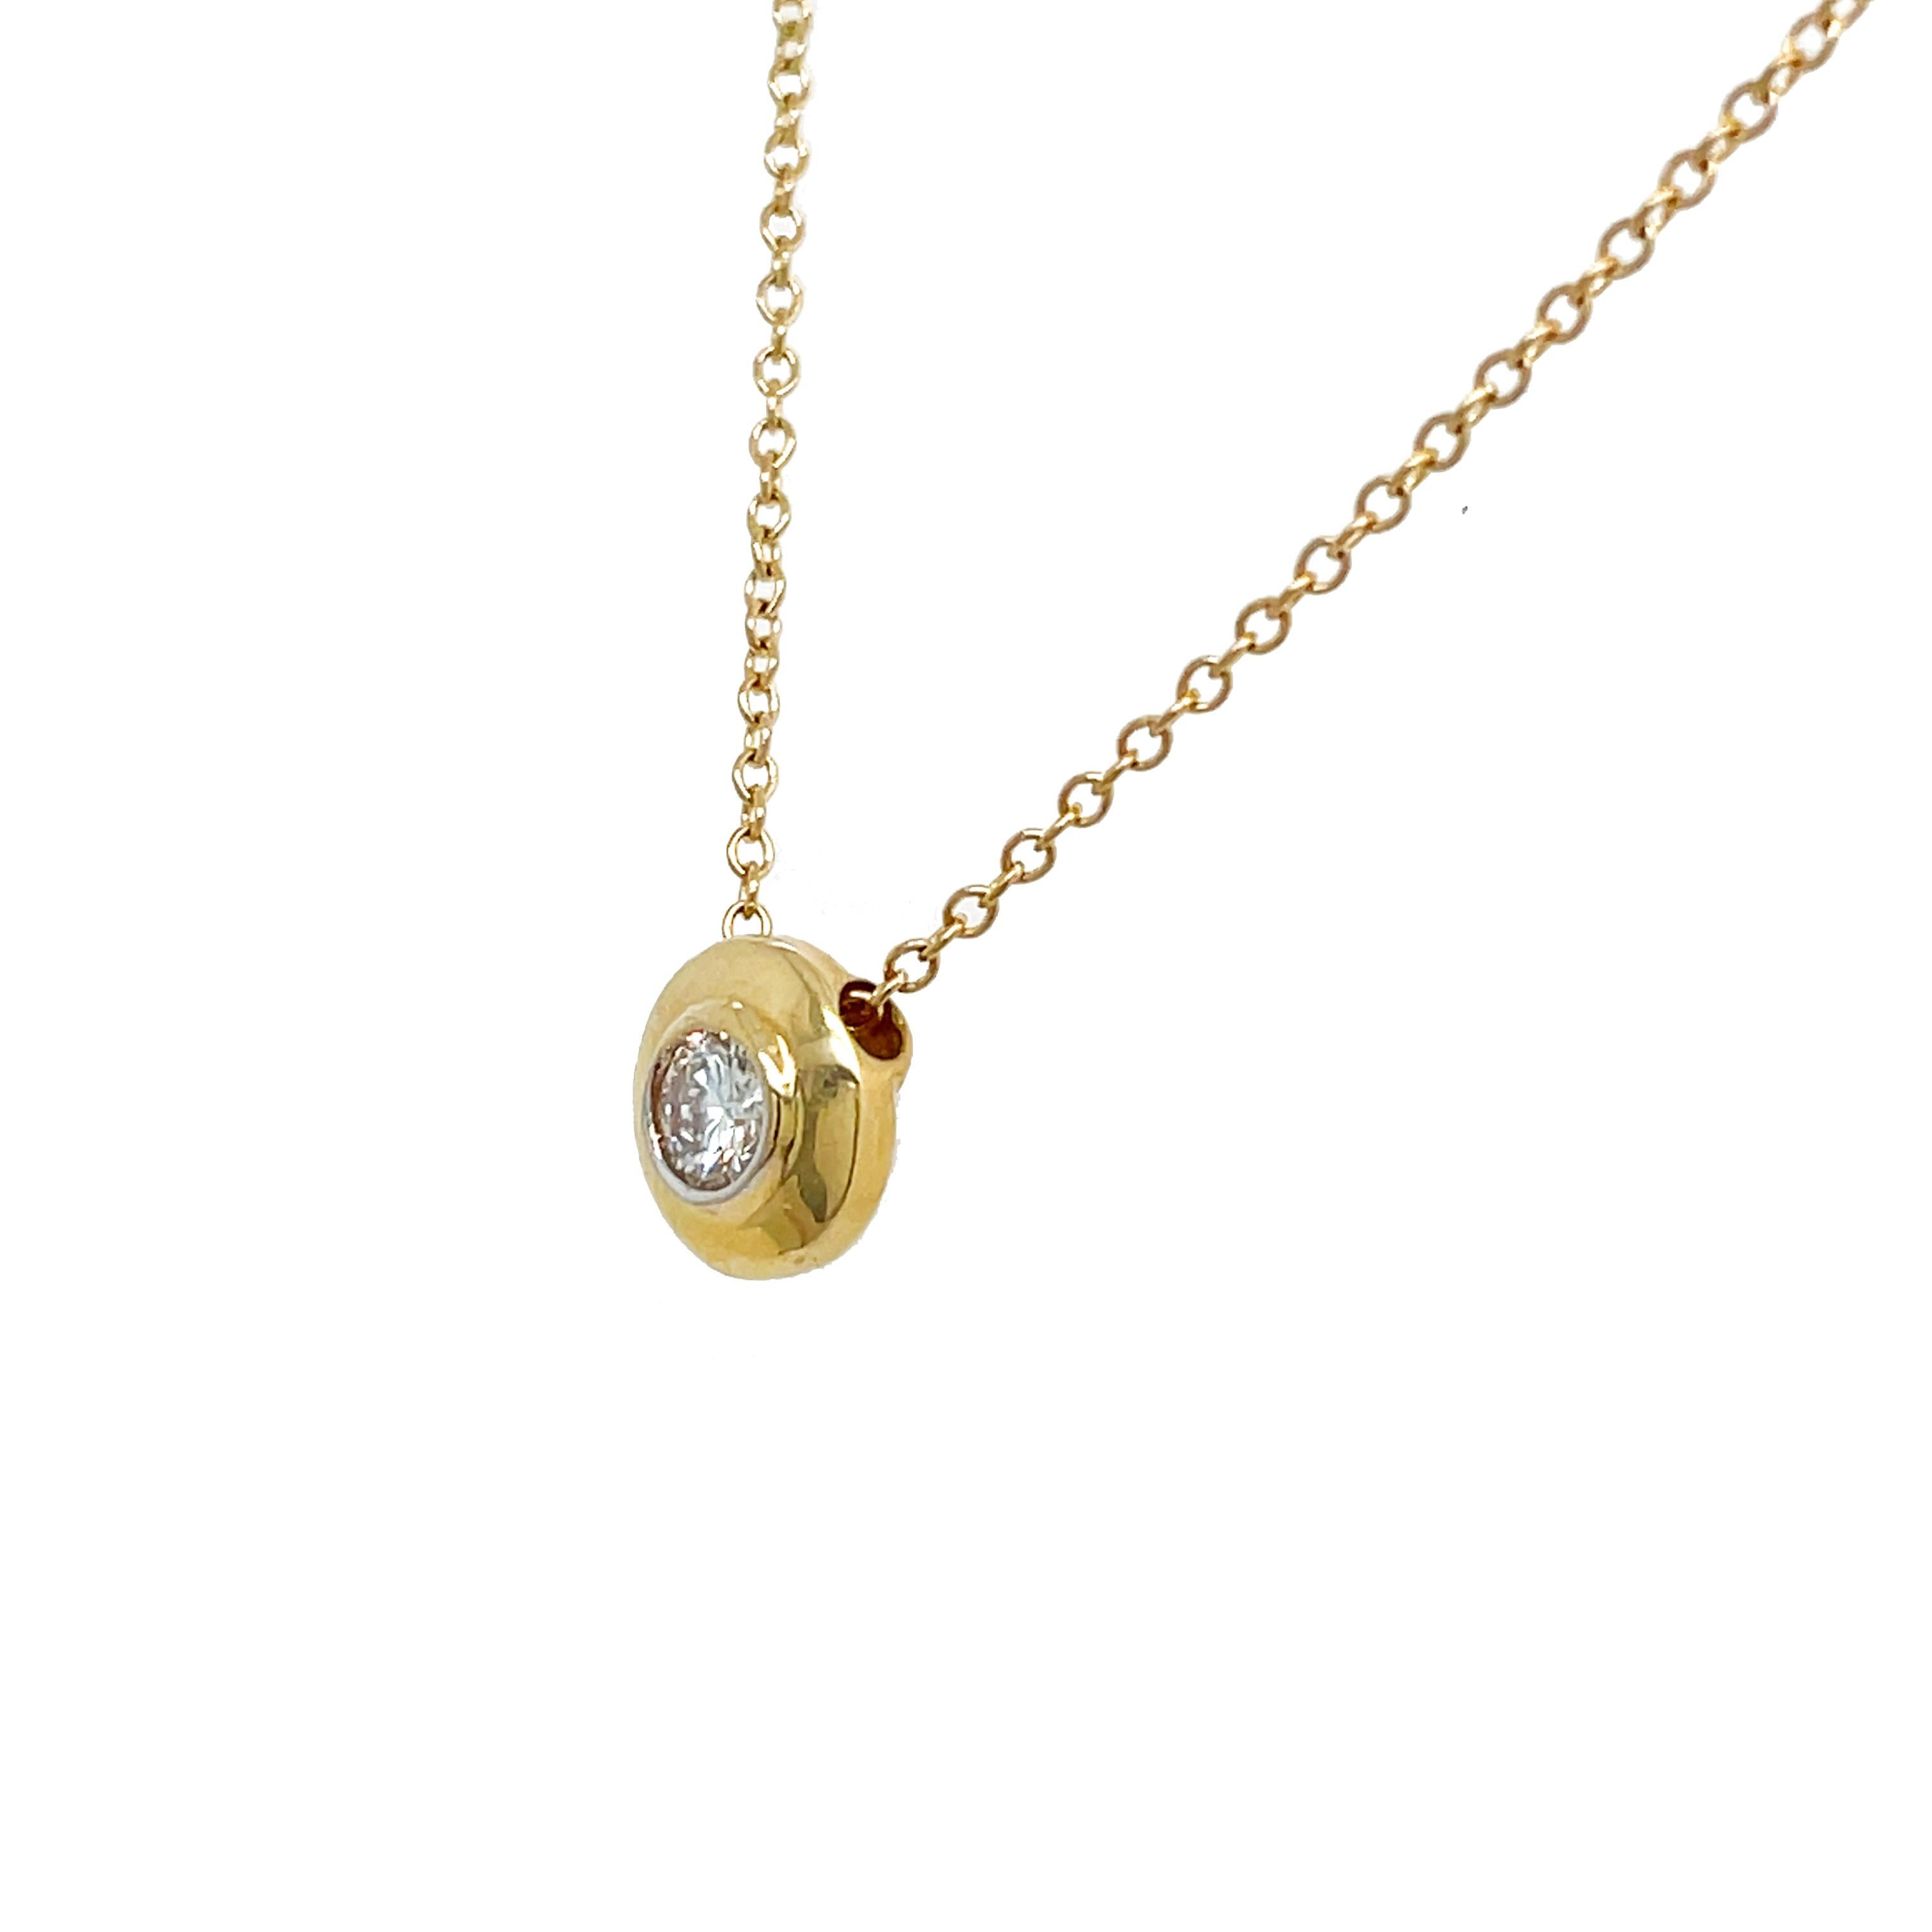 Contemporary 14K Yellow Gold Floating Diamond Bezel Pendant Necklace For Sale